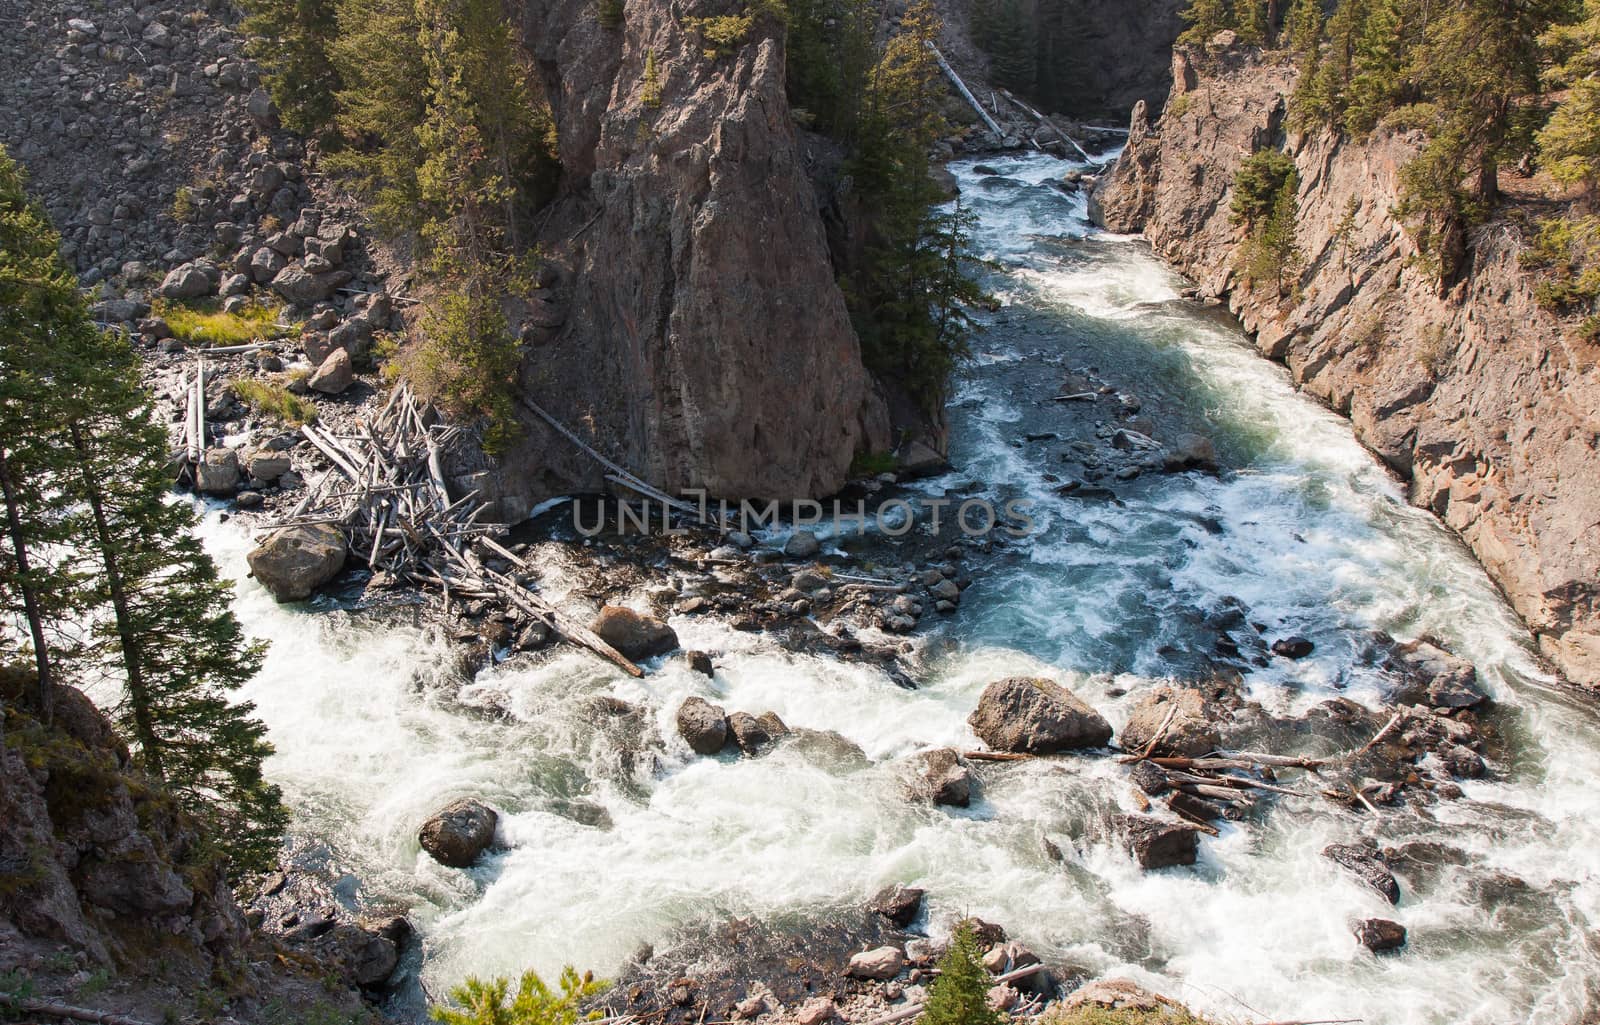 The Firehole River at Yellowstone National Park is a picturesque, pristine waterway.